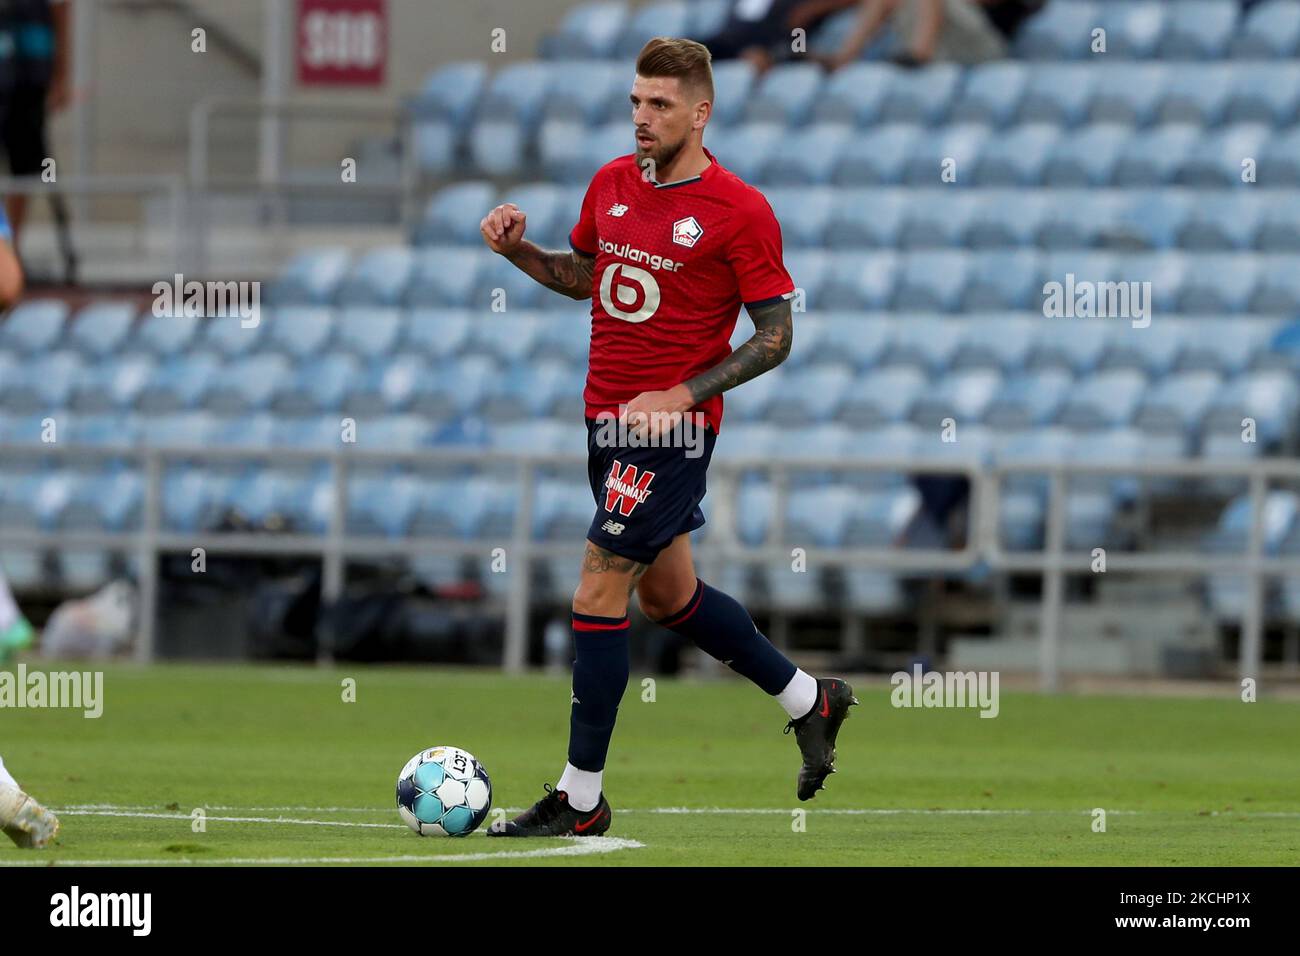 Miguel da Silva Rocha of Lille OSC in action during the pre-season friendly football match between FC Porto and Lille OSC at the Algarve stadium in Loule, Portugal on July 25, 2021. (Photo by Pedro FiÃºza/NurPhoto) Stock Photo